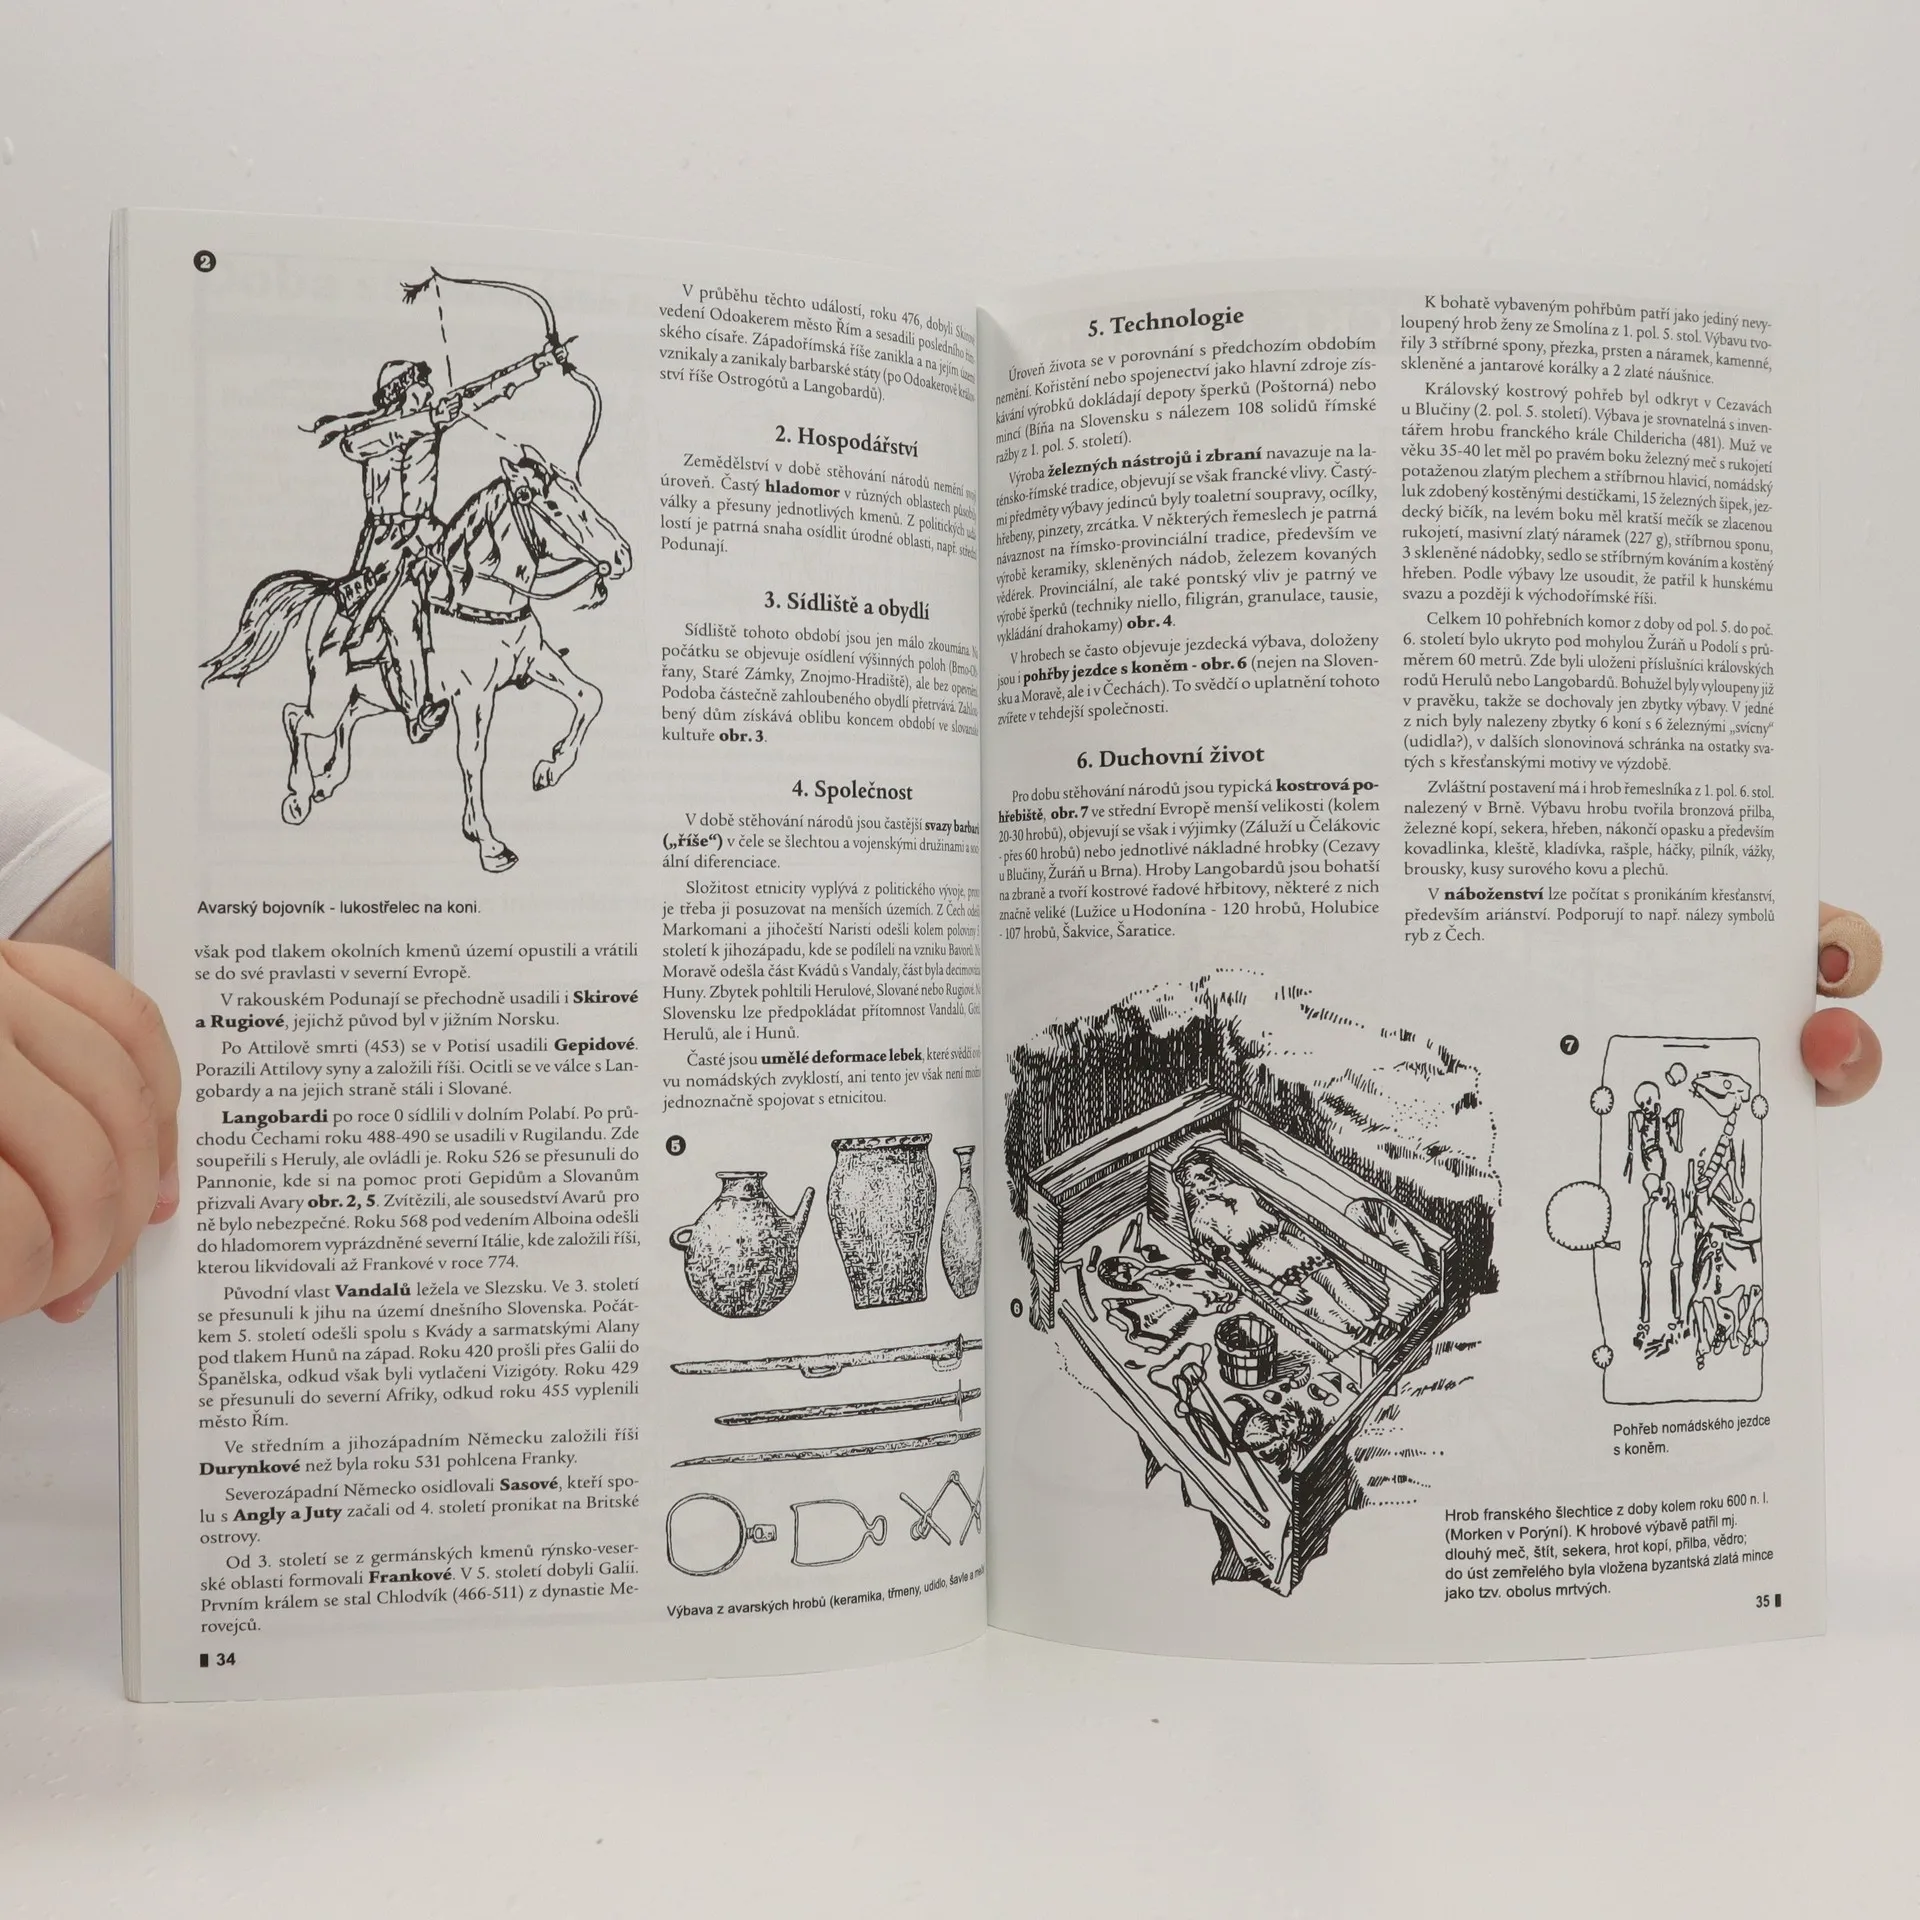 Keys To Drawing With Imagination PDF